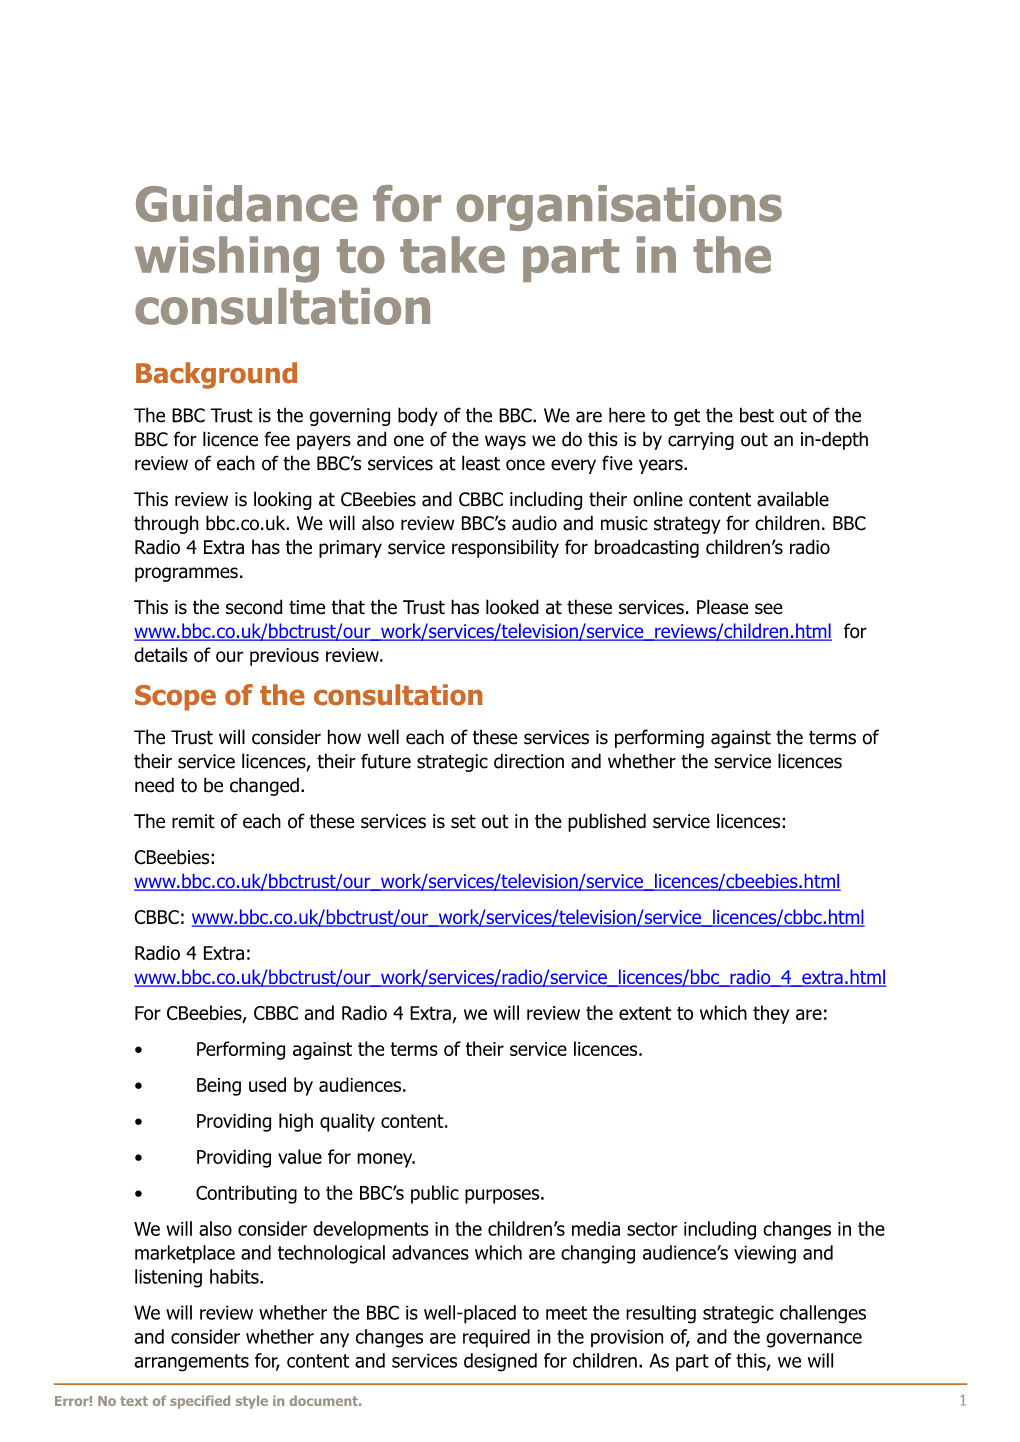 Guidance for Organisations Wishing to Take Part in the Consultation Background the BBC Trust Is the Governing Body of the BBC